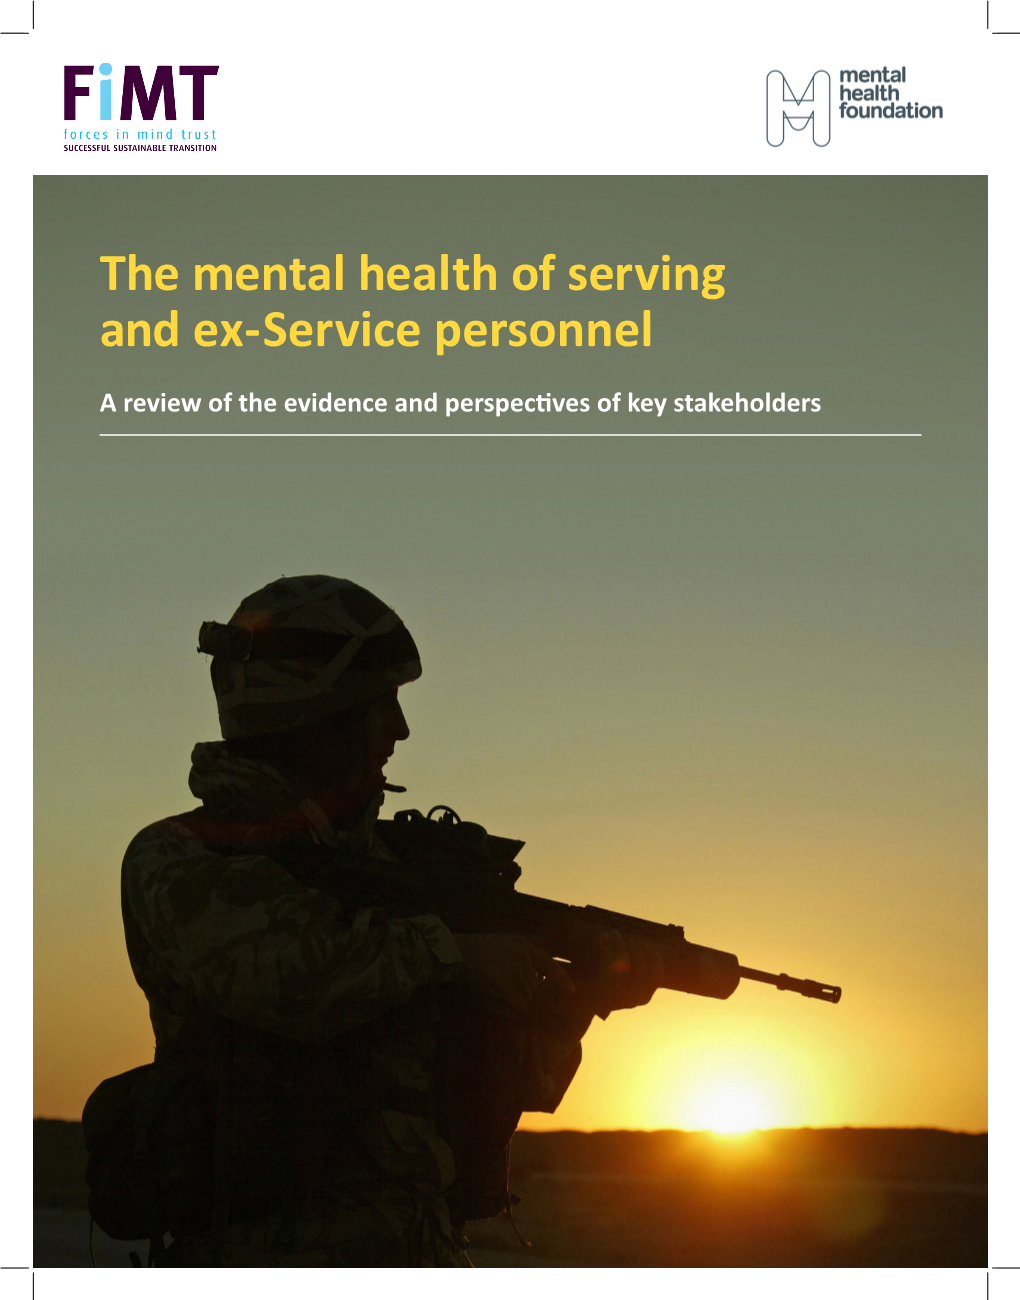 The Mental Health of Serving and Ex-Service Personnel